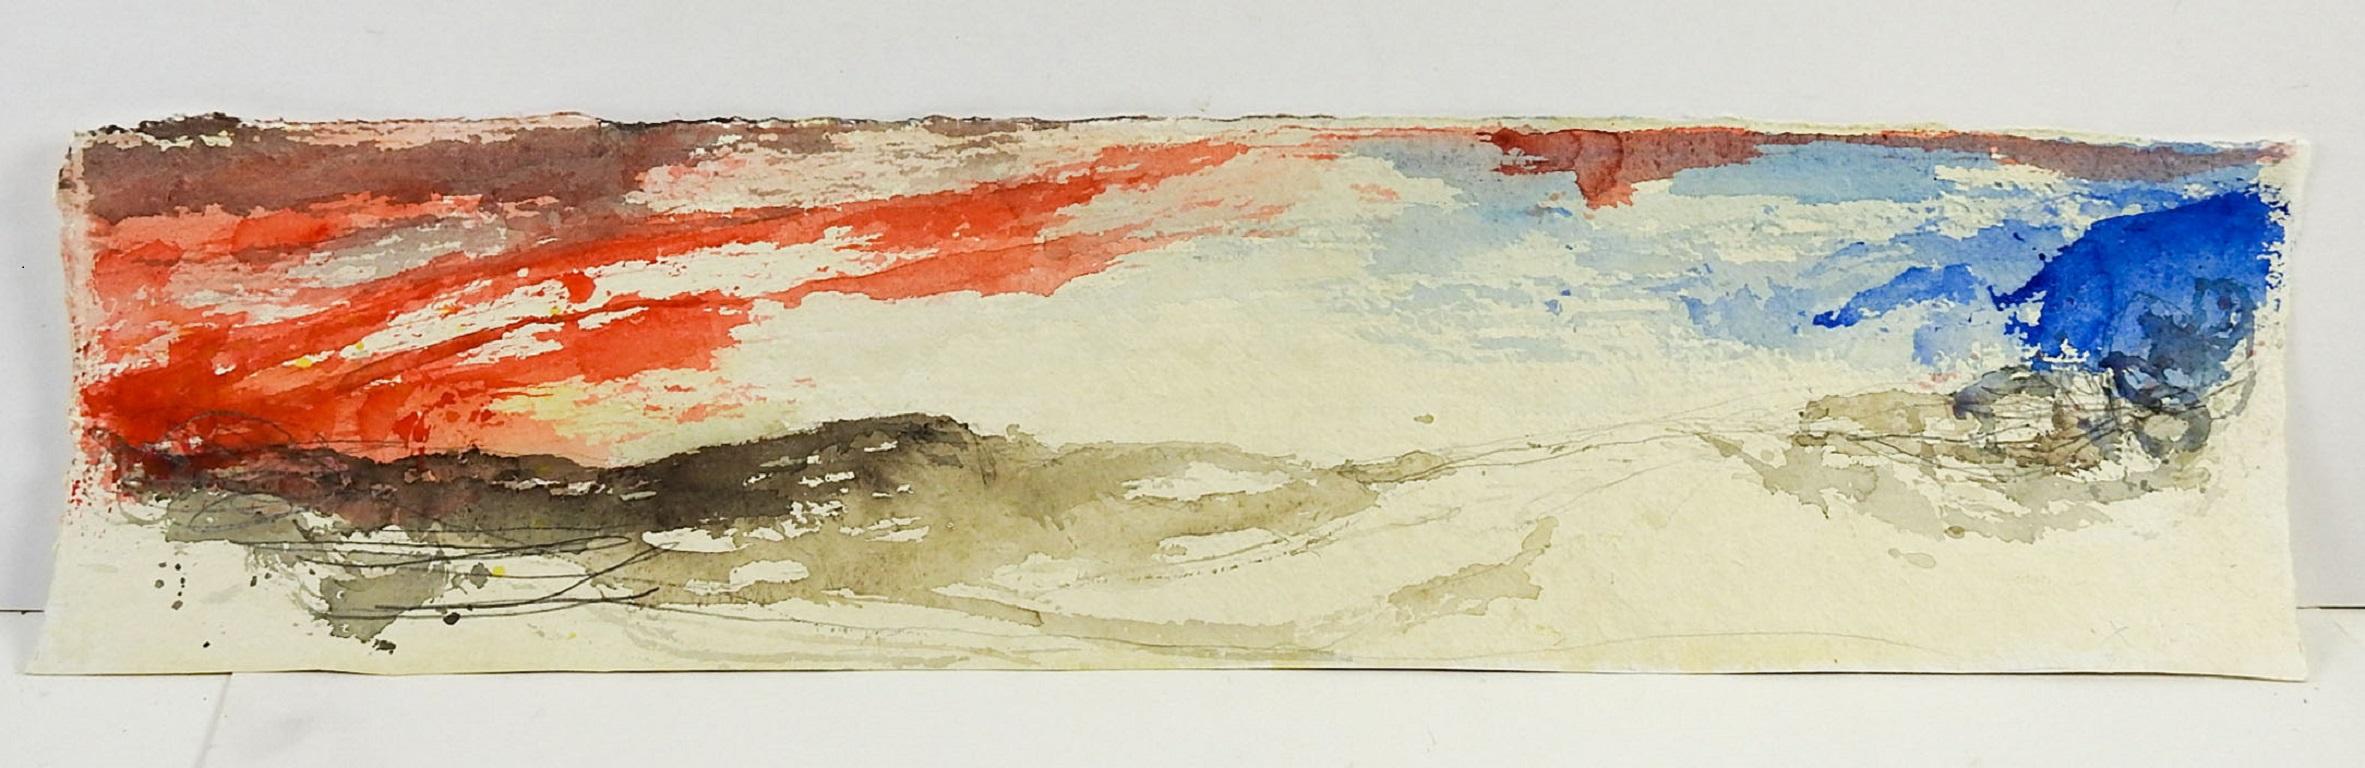 Early 21st century long-format abstract landscape in red, blue and gray by George Turner (1943-2014) using watercolor and pencil on heavy watercolor paper. Unframed, signed with an X lower right, from the artist's estate. I have a number of these